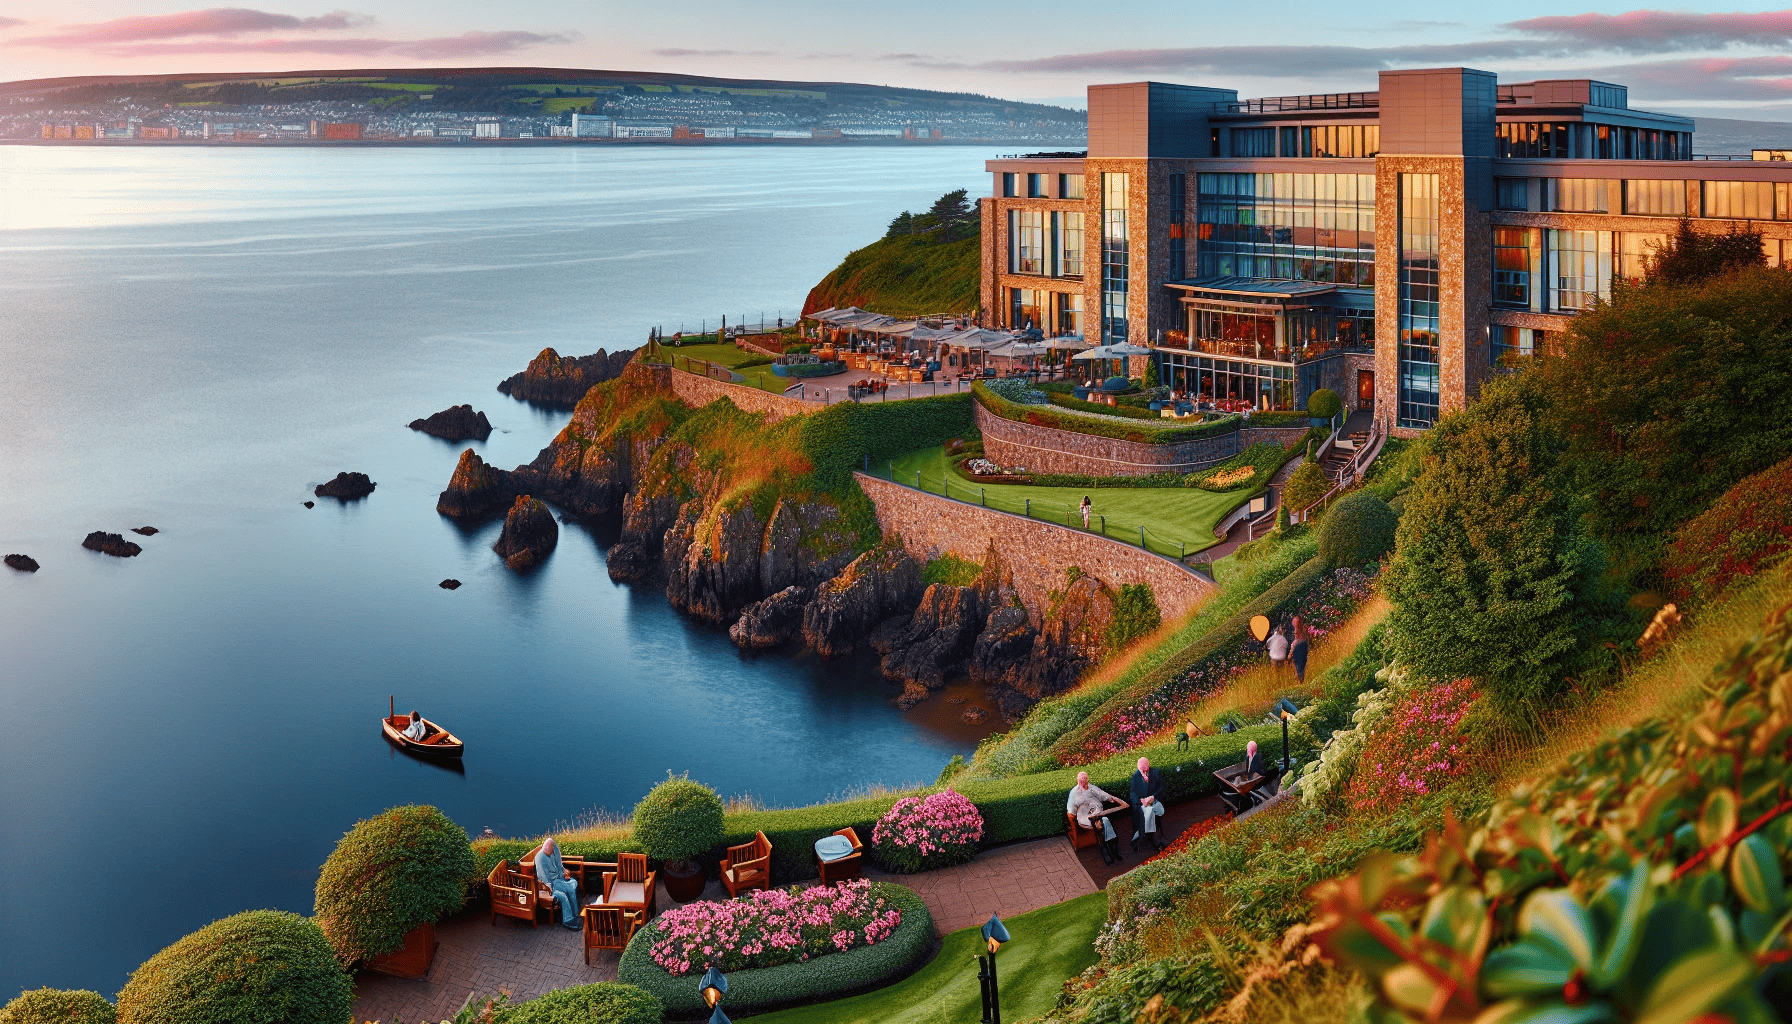 Stunning coastal views from a spa hotel overlooking Belfast Lough in Northern Ireland